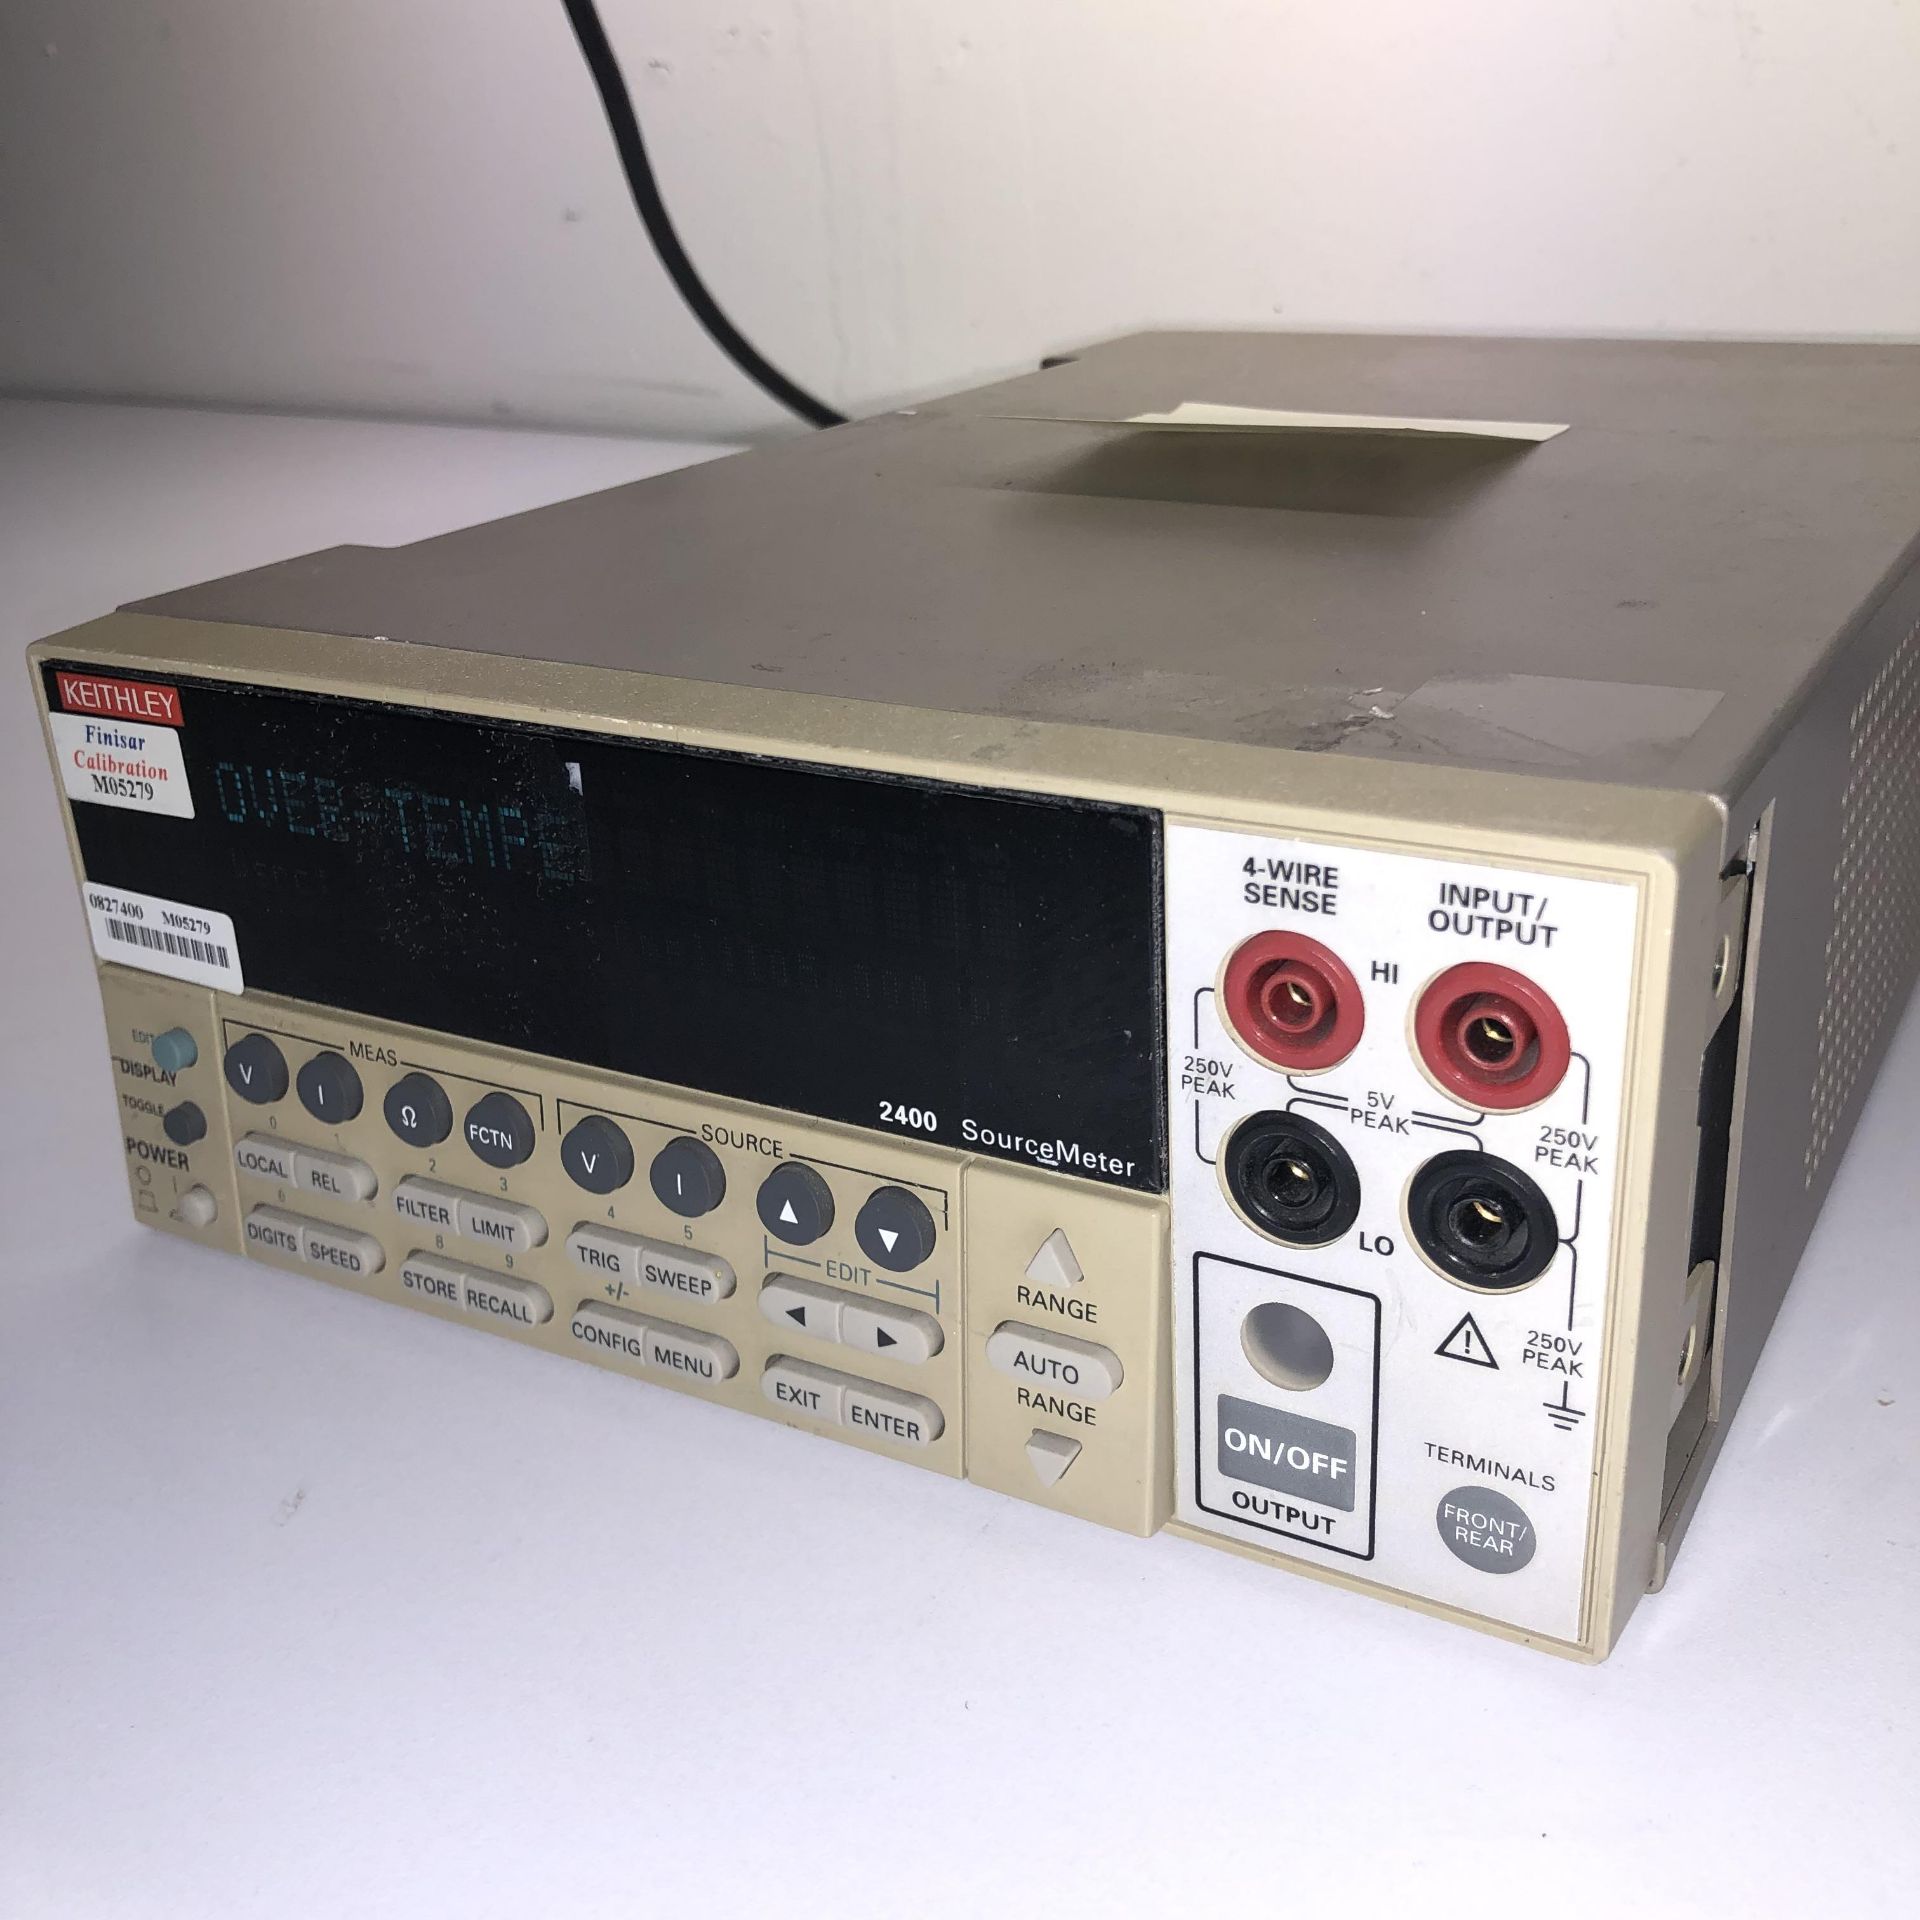 KEITHLEY 2400 SOURCE METER   Fail Rear Resistance   1218 Alderwood Ave Sunnyvale, California - Image 3 of 5